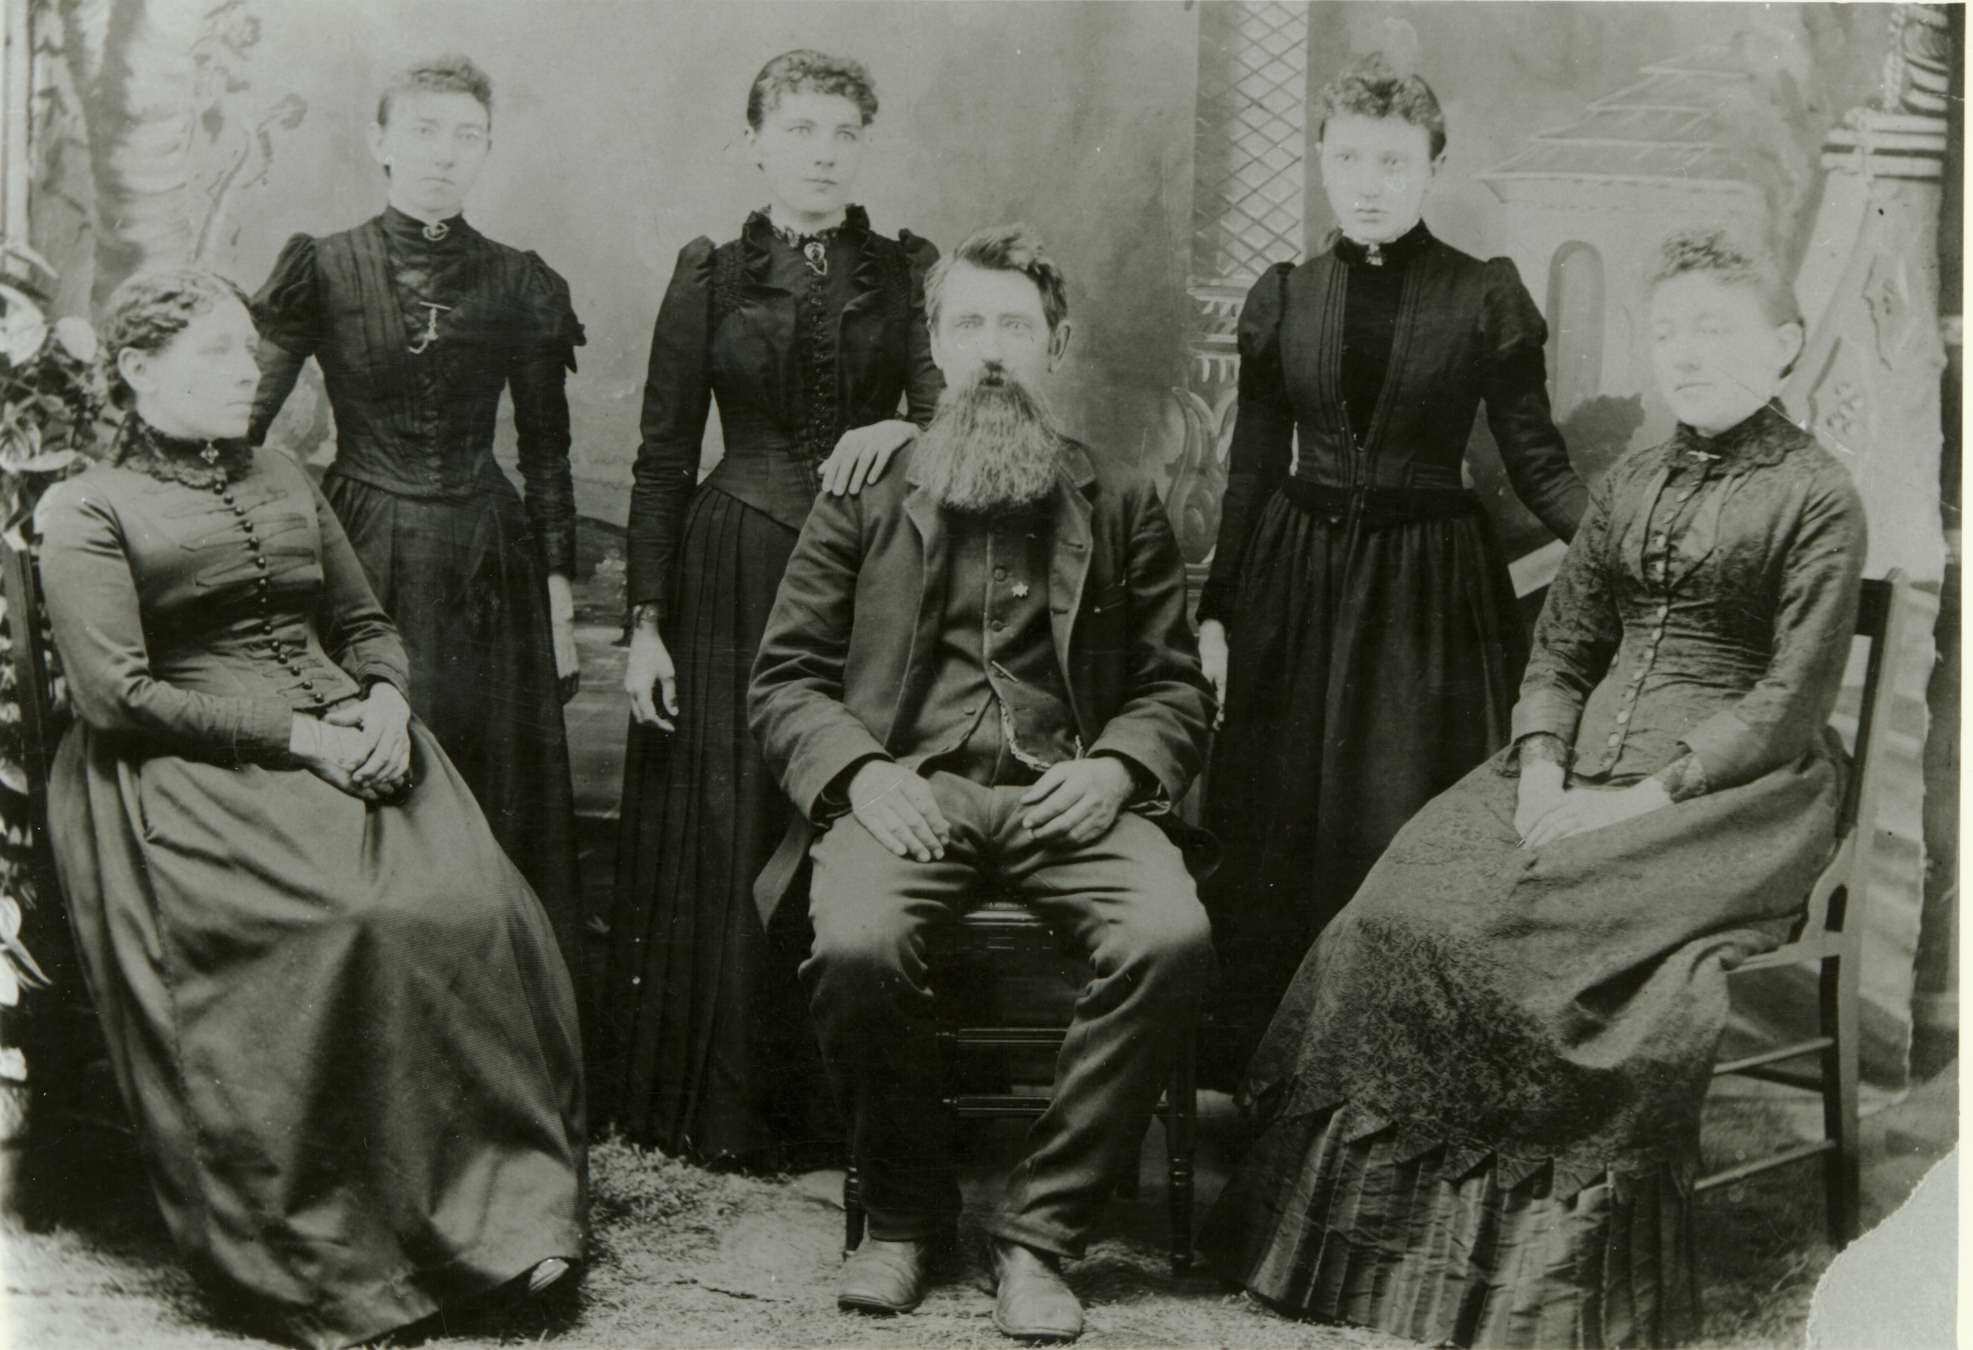 Ingalls Family, including Carrie Ingalls